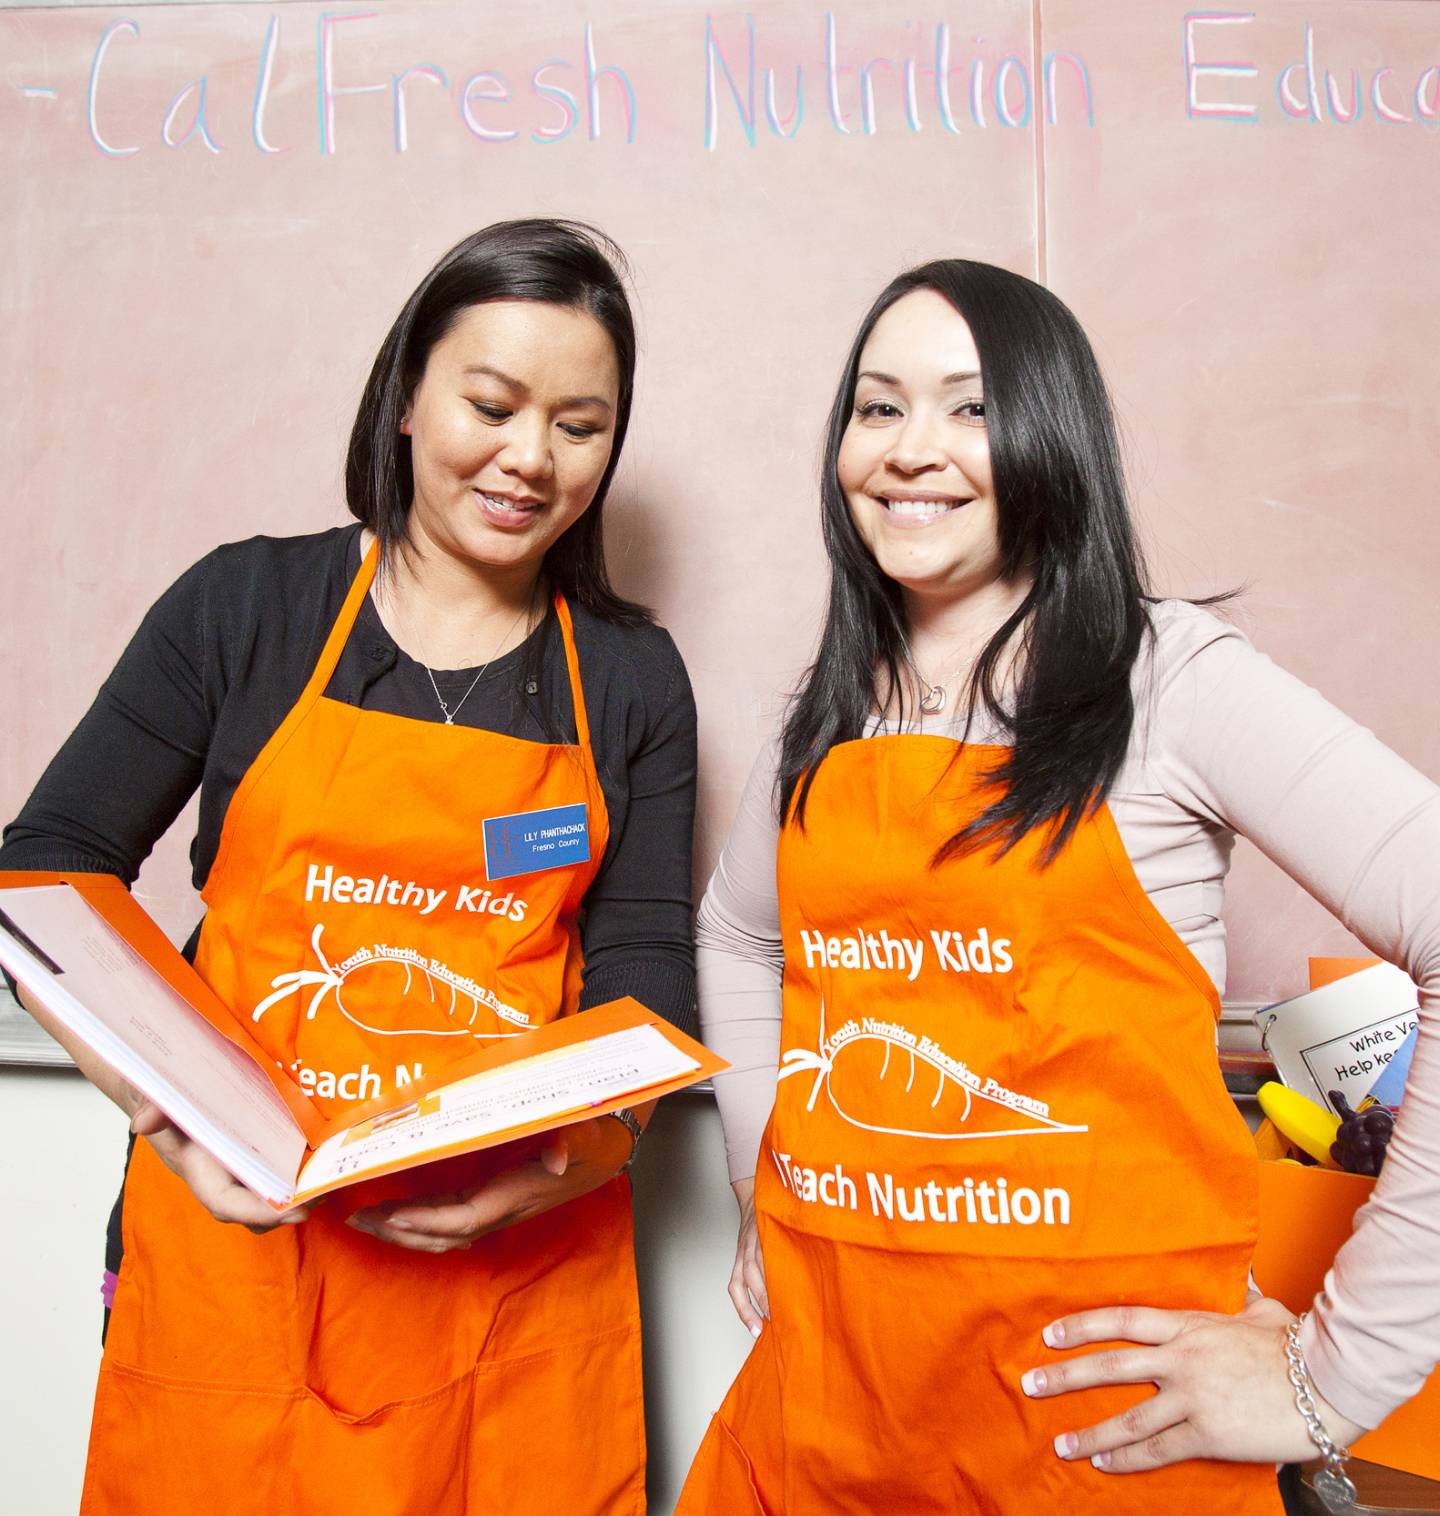 Two women in orange aprons one holding a book